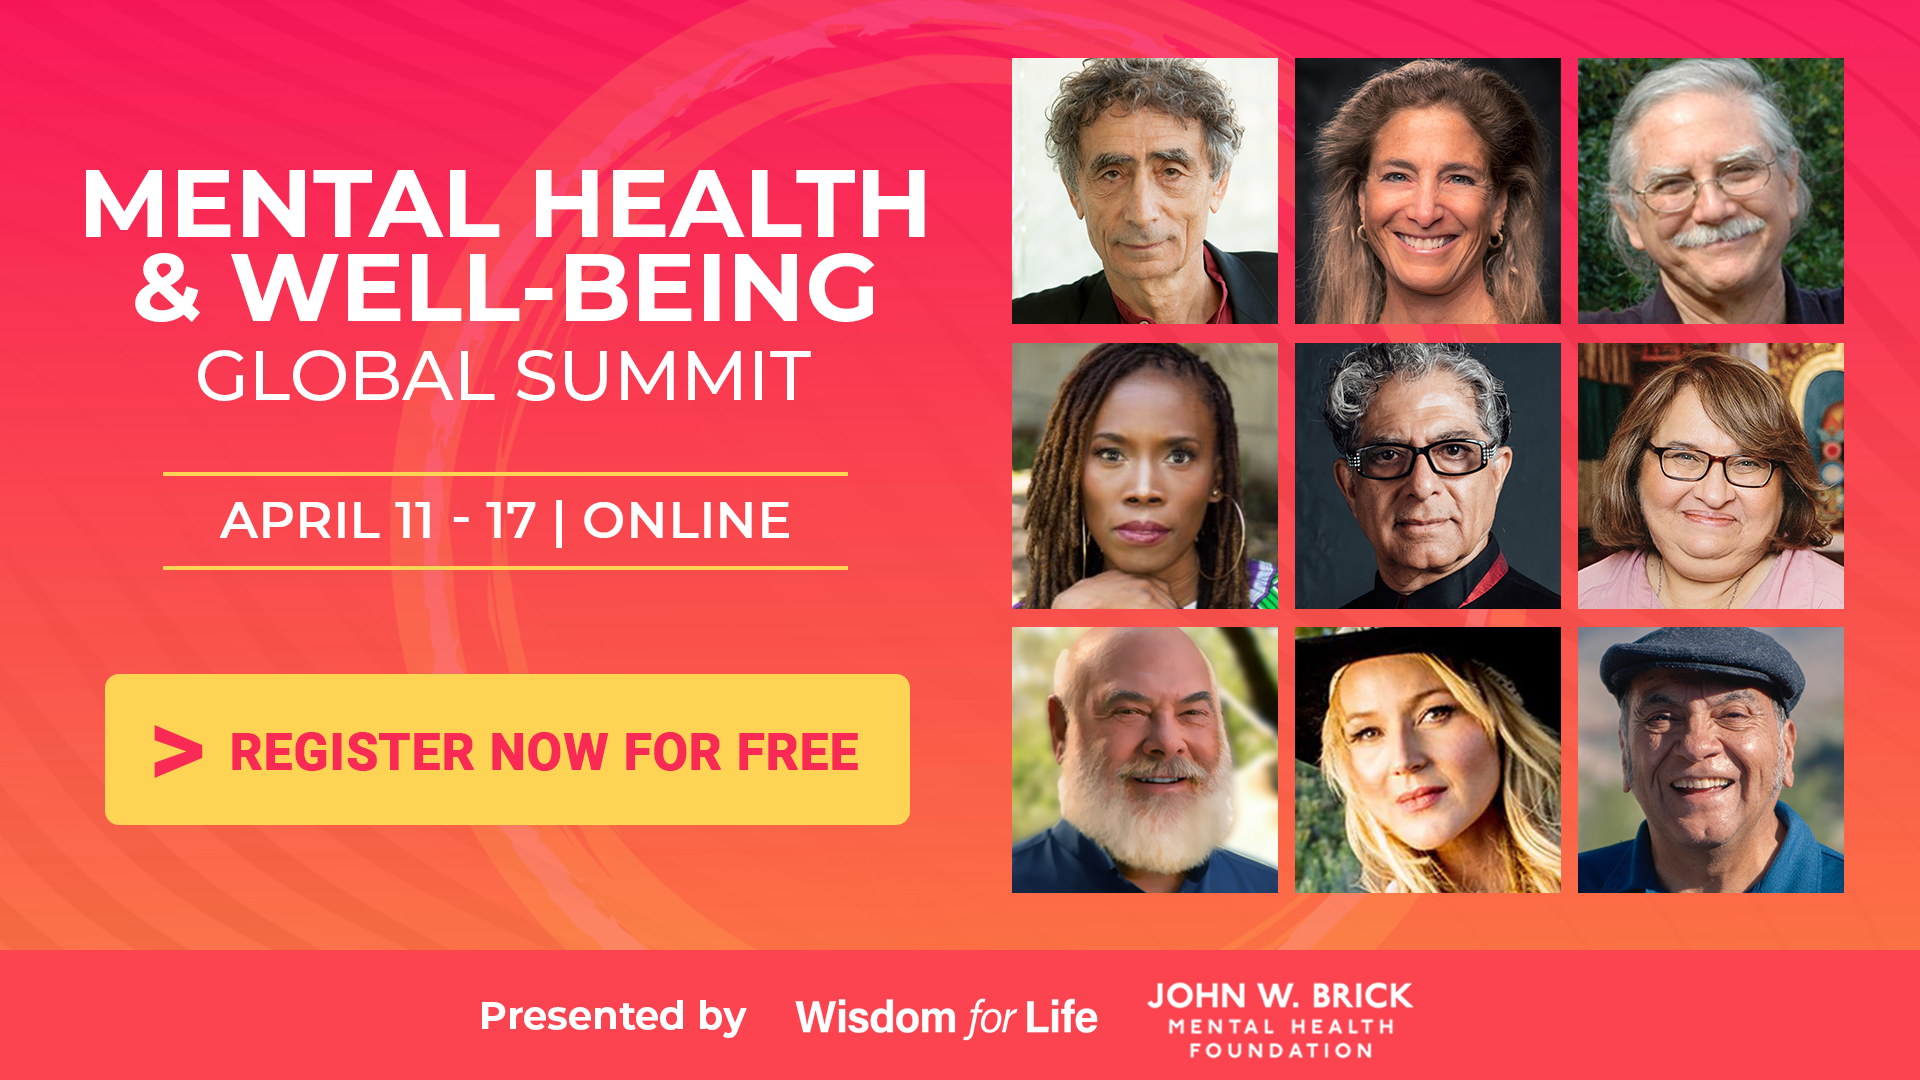 Mental Health & Well-Being Global Summit, April 11-17, 2023 Online